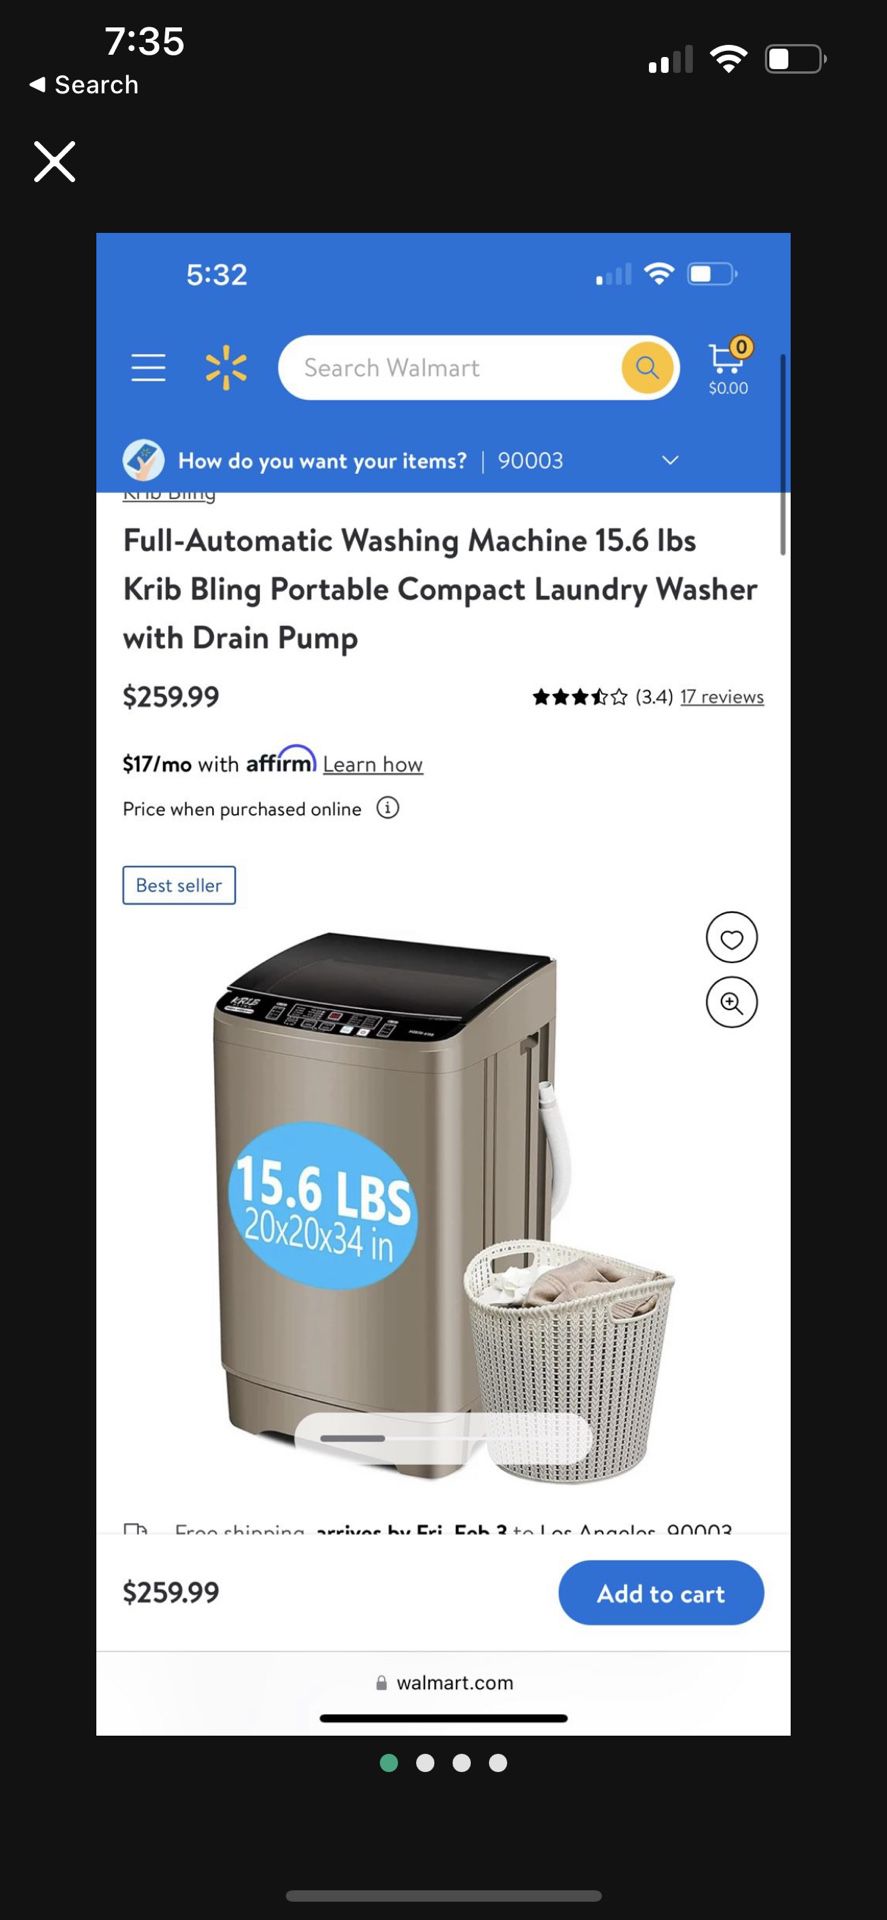 Brand New Full-Automatic Washing Machine 15.6 lbs Krib Bling Portable Compact Laundry Washer with Drain Pump